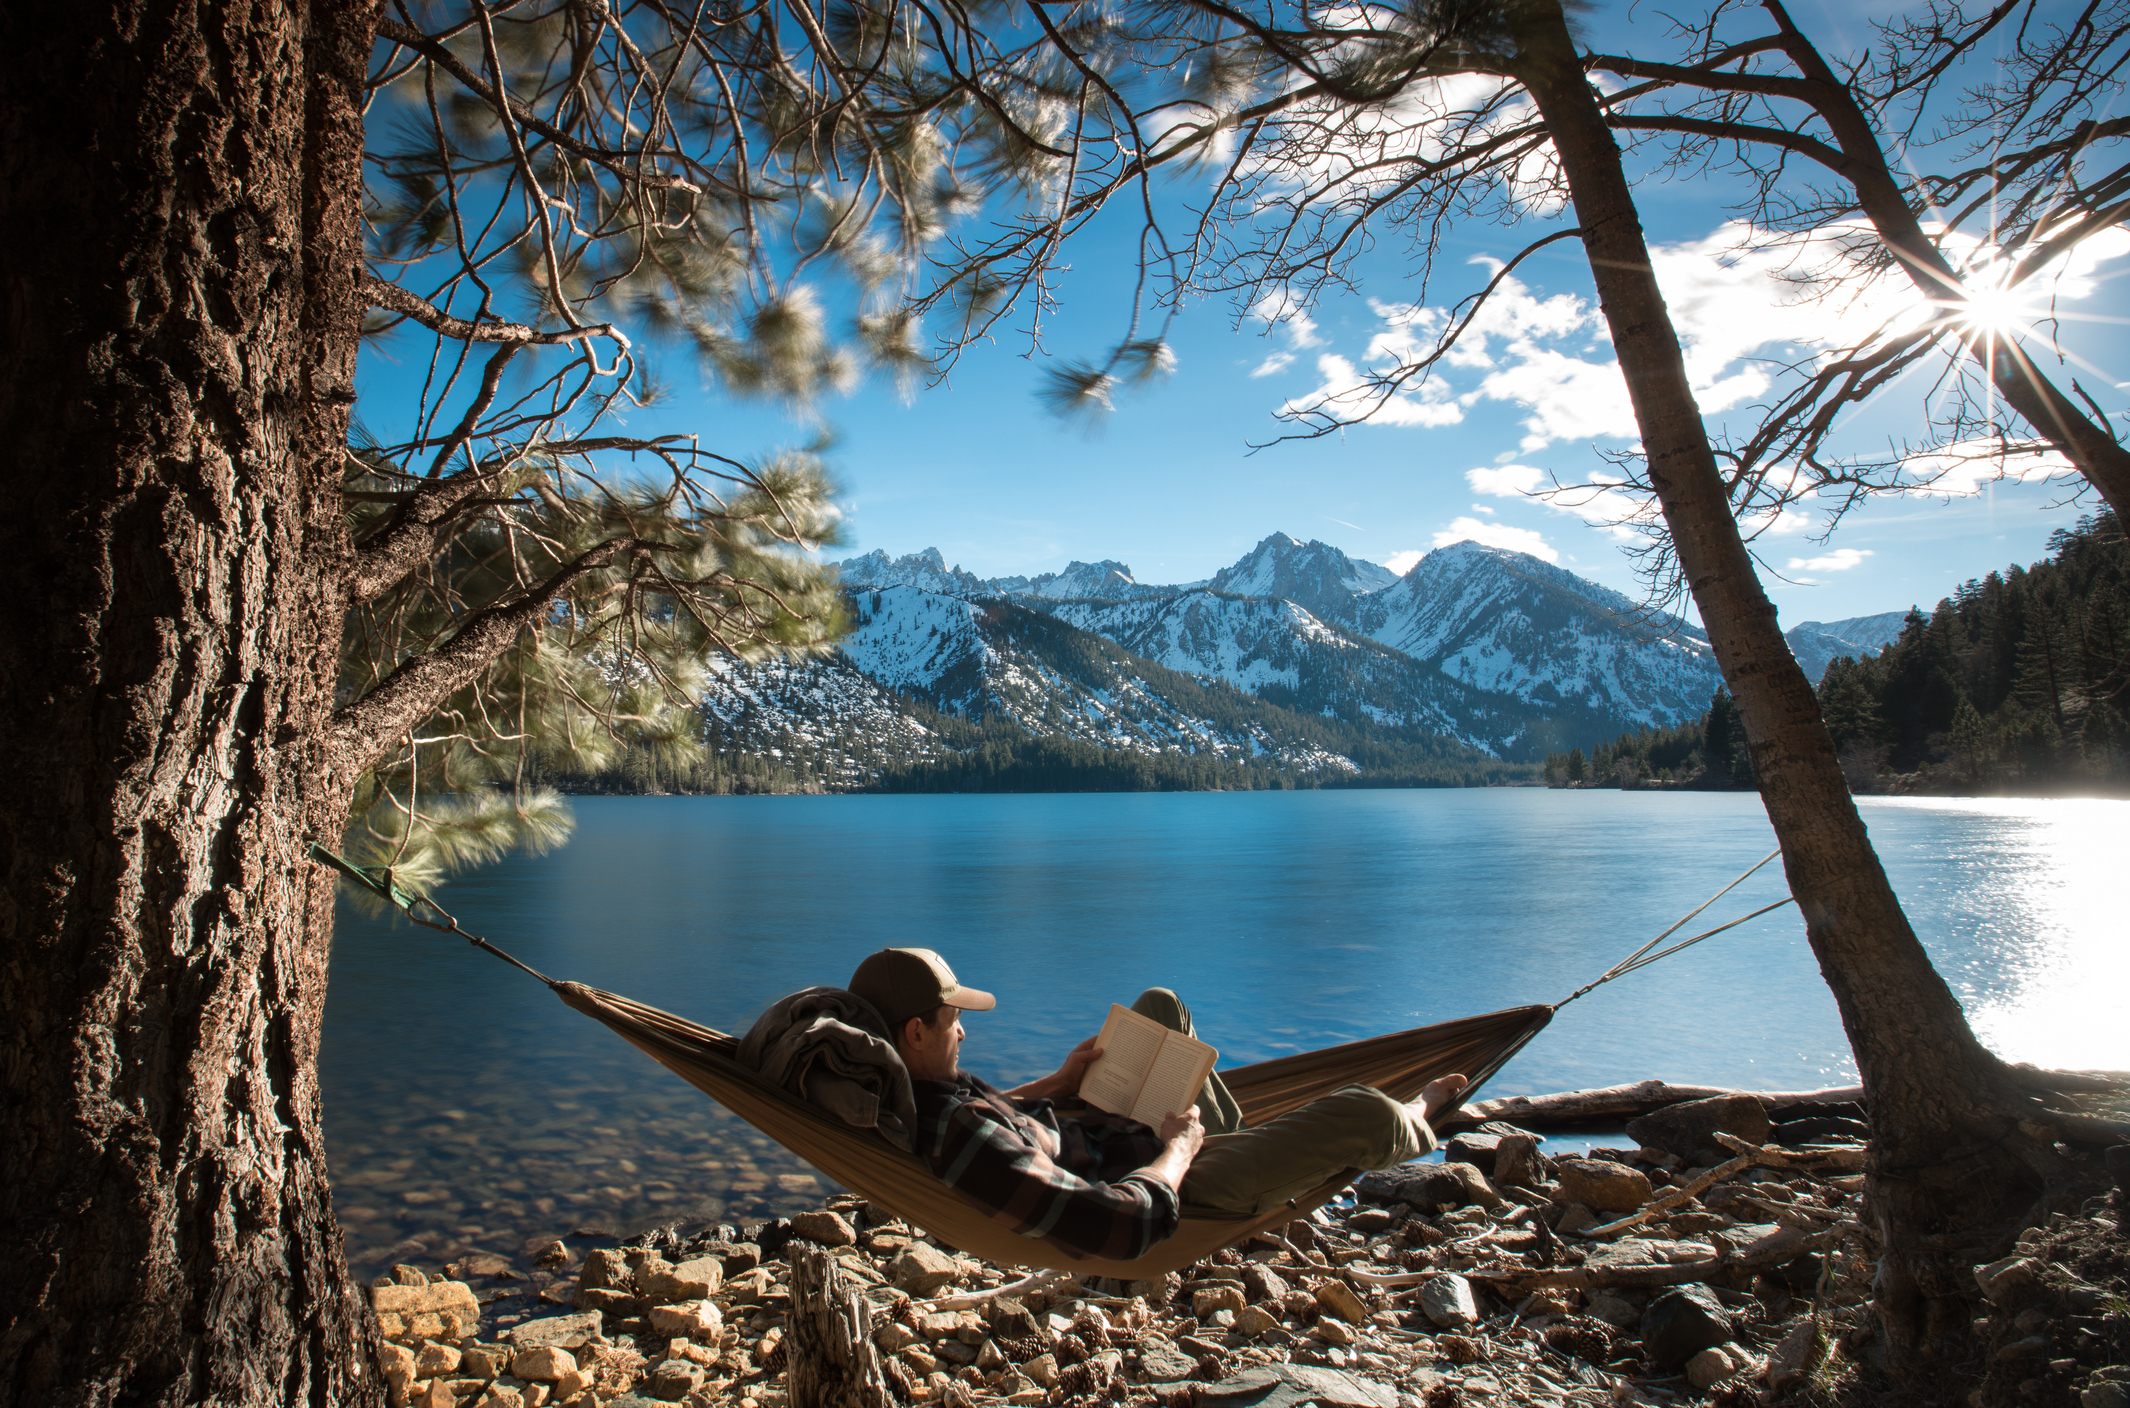 Person in a hammock by a lake, reading a book, with mountains in the background